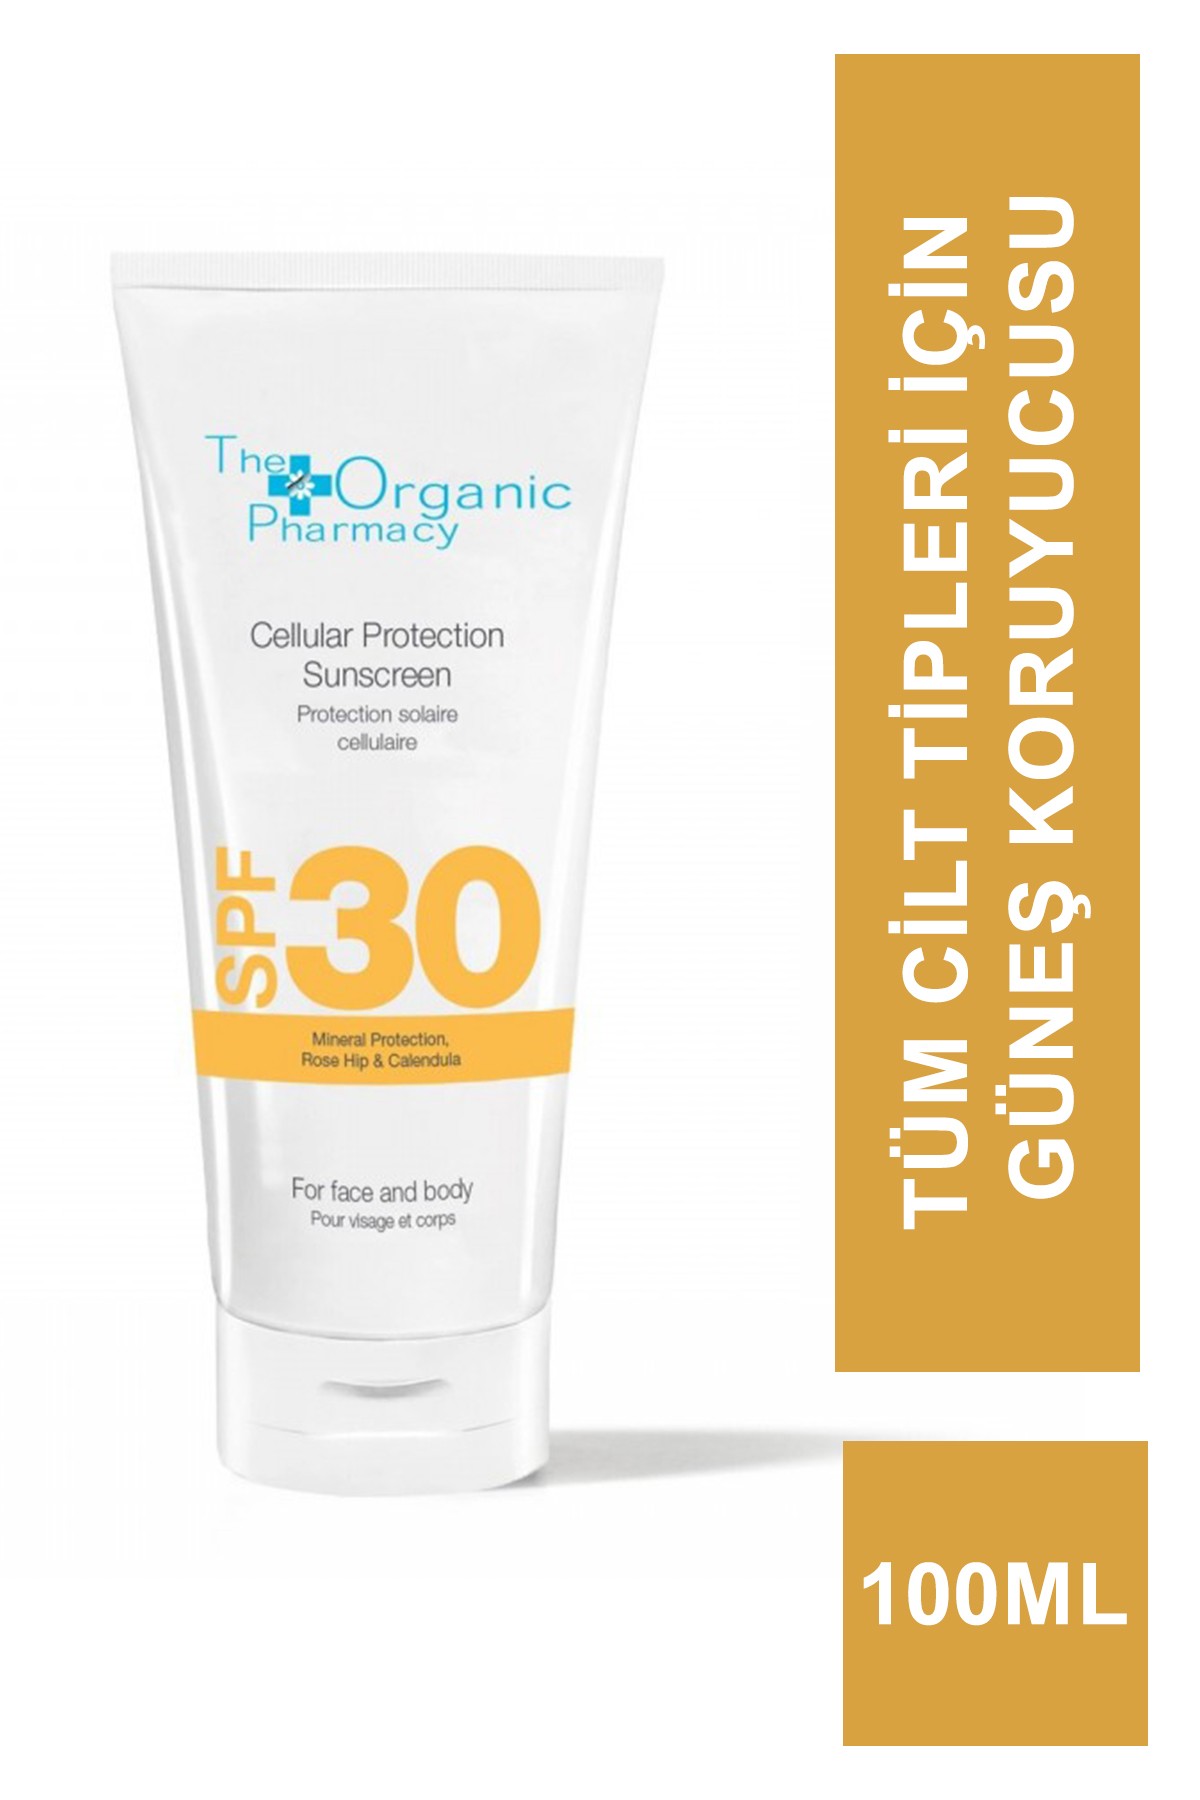 Outlet - The Organic Pharmacy Celluar Protection Sunscreen SPF30 100ml